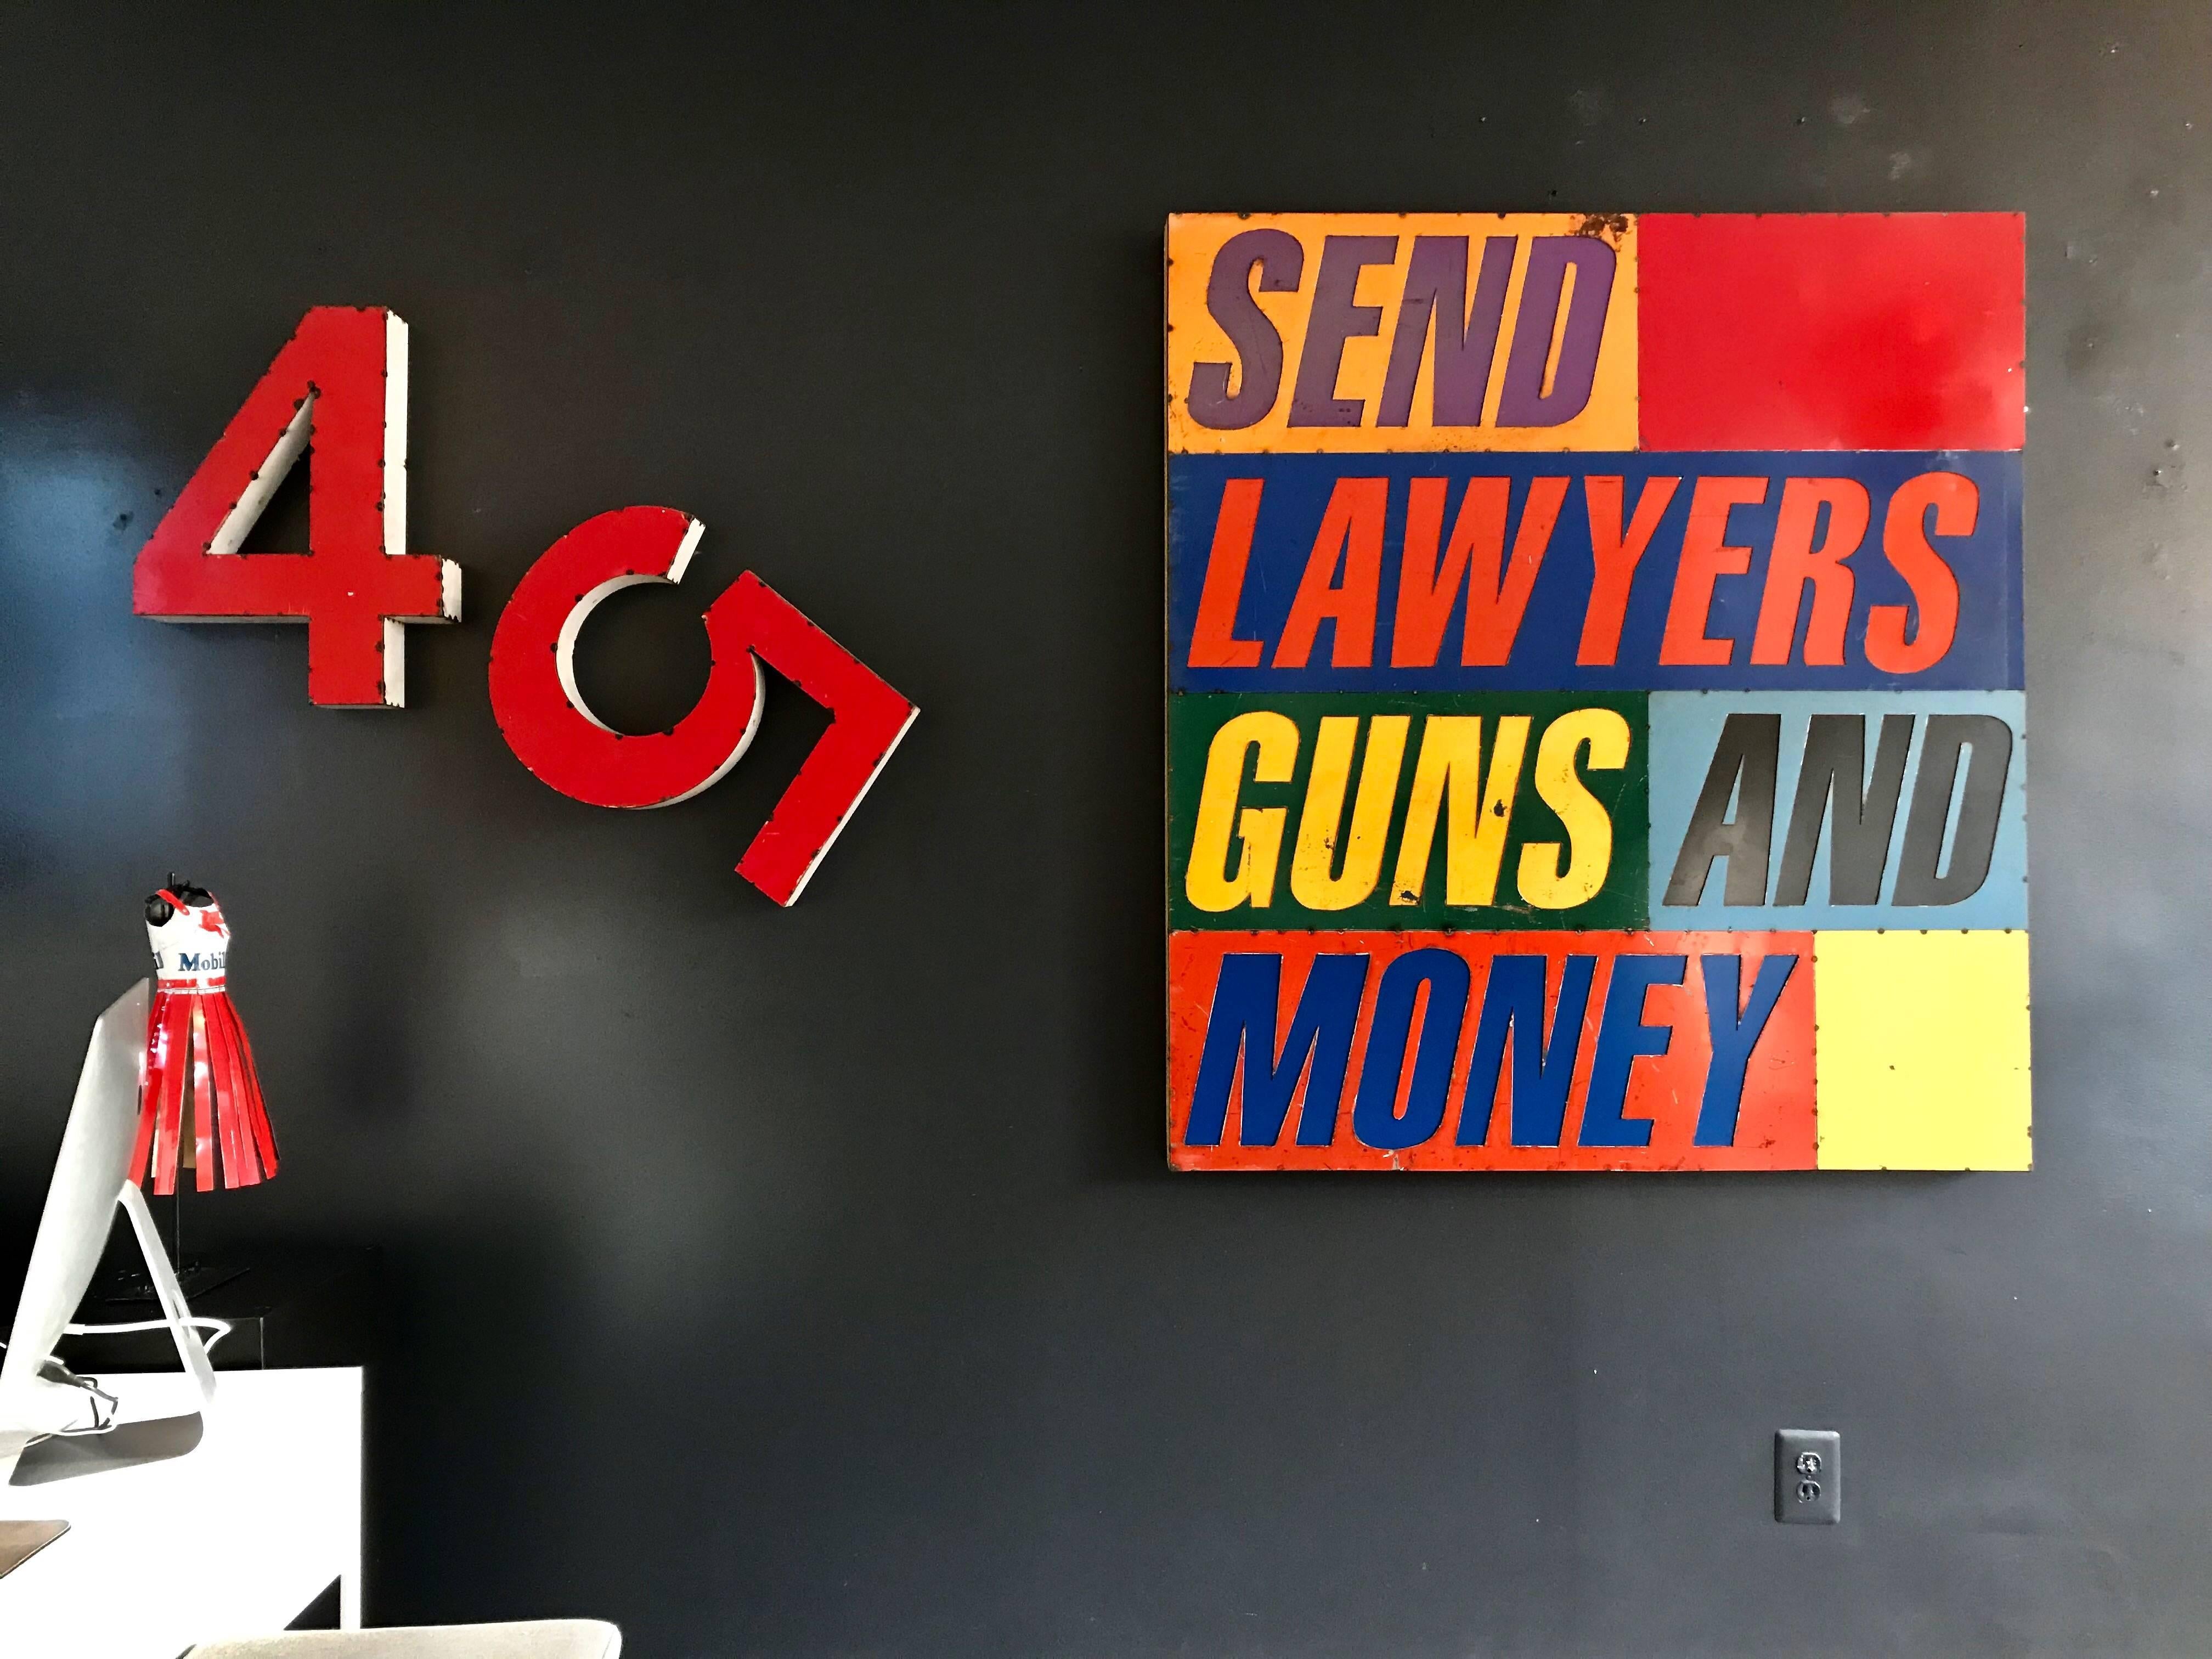 send lawyers guns and money meaning